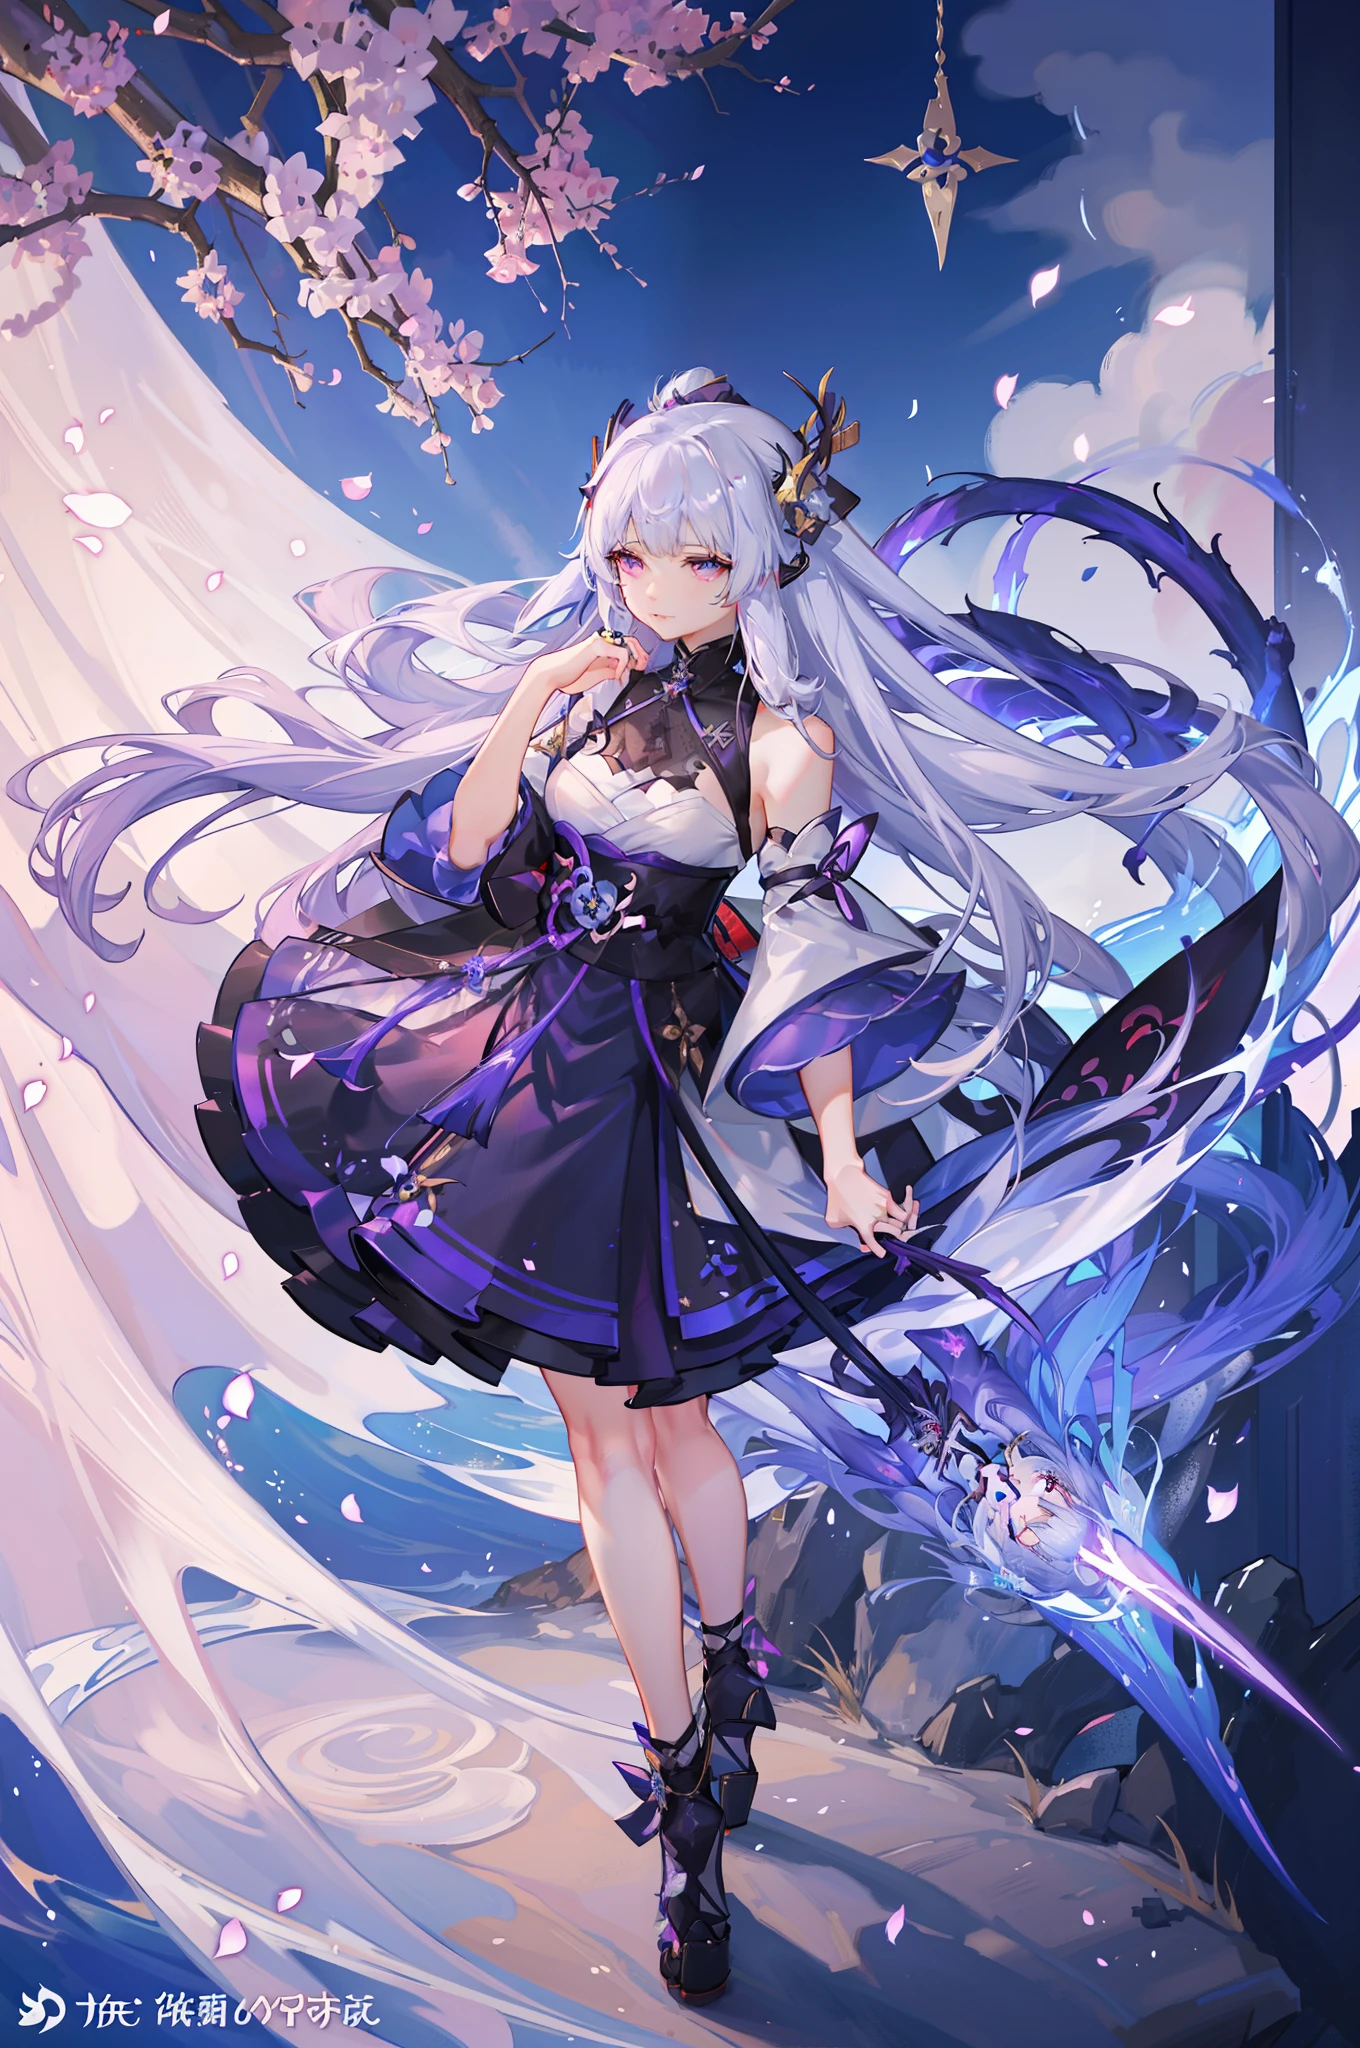 Anime girl with long white hair and purple hair in a purple dress, keqing from genshin impact, genshin impact character, Ayaka Genshin Impact, zhongli from genshin impact, astri lohne, from arknights, white haired god, full portrait of elementalist, arcane art style, Official Character Art, Hajime Yatate